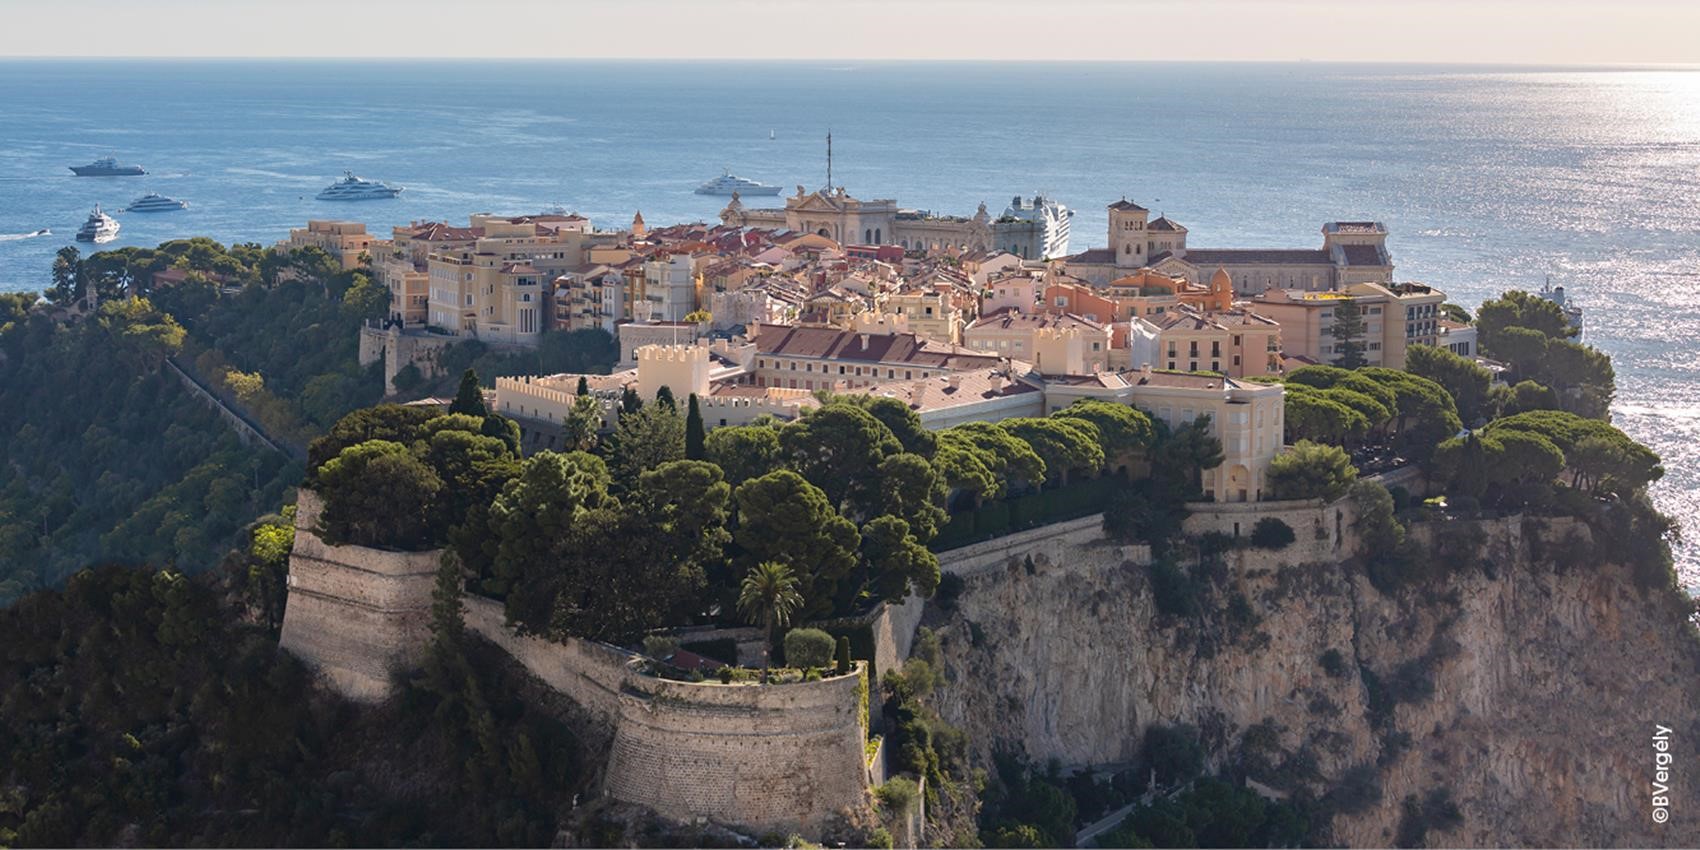 The fortress of Monaco overlooking the port on the Mediterranean. 